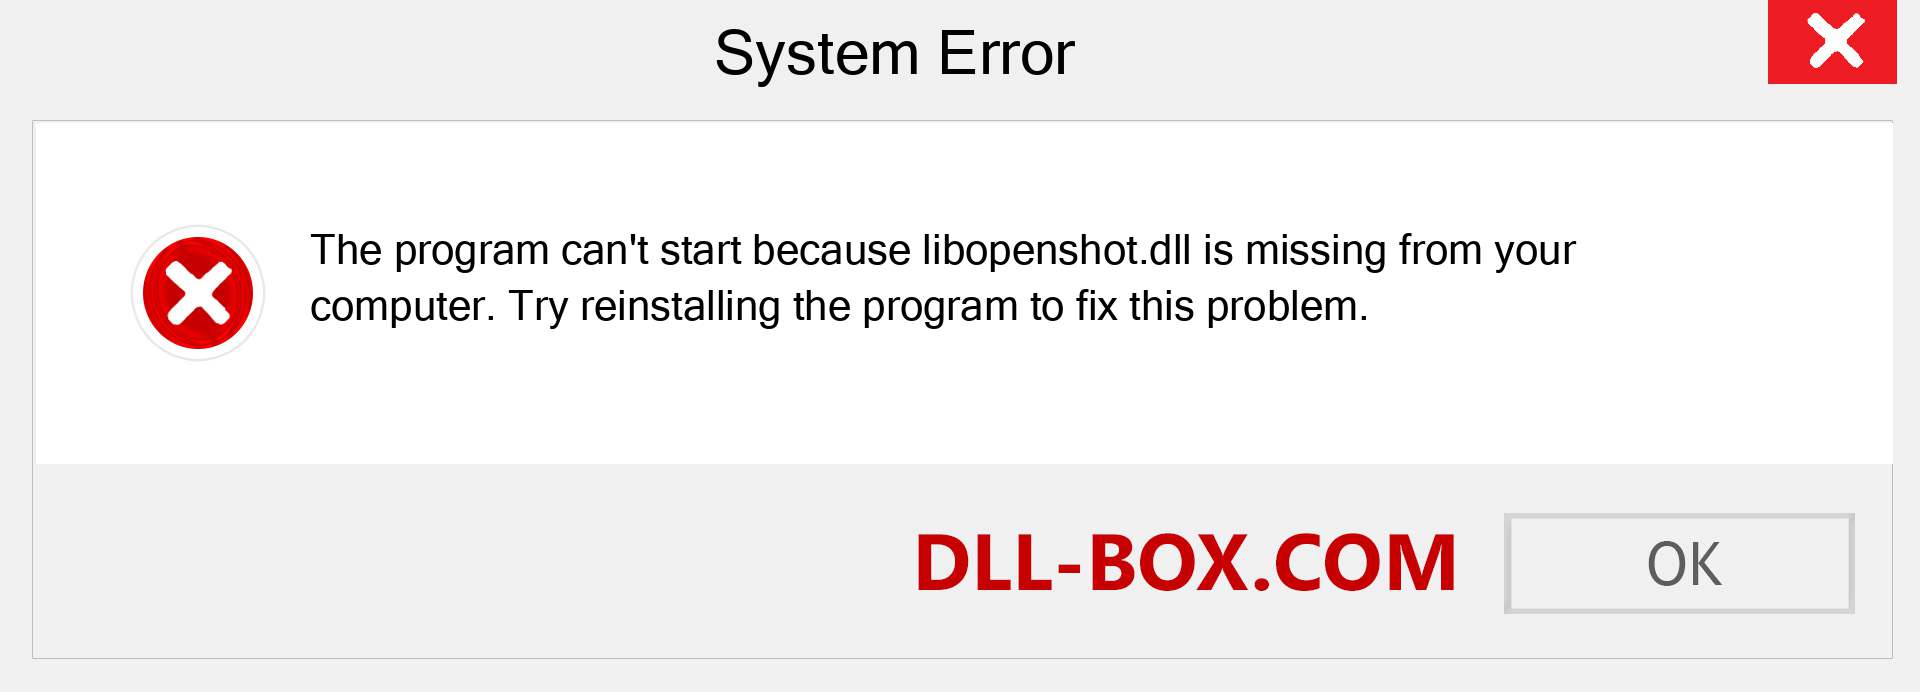  libopenshot.dll file is missing?. Download for Windows 7, 8, 10 - Fix  libopenshot dll Missing Error on Windows, photos, images